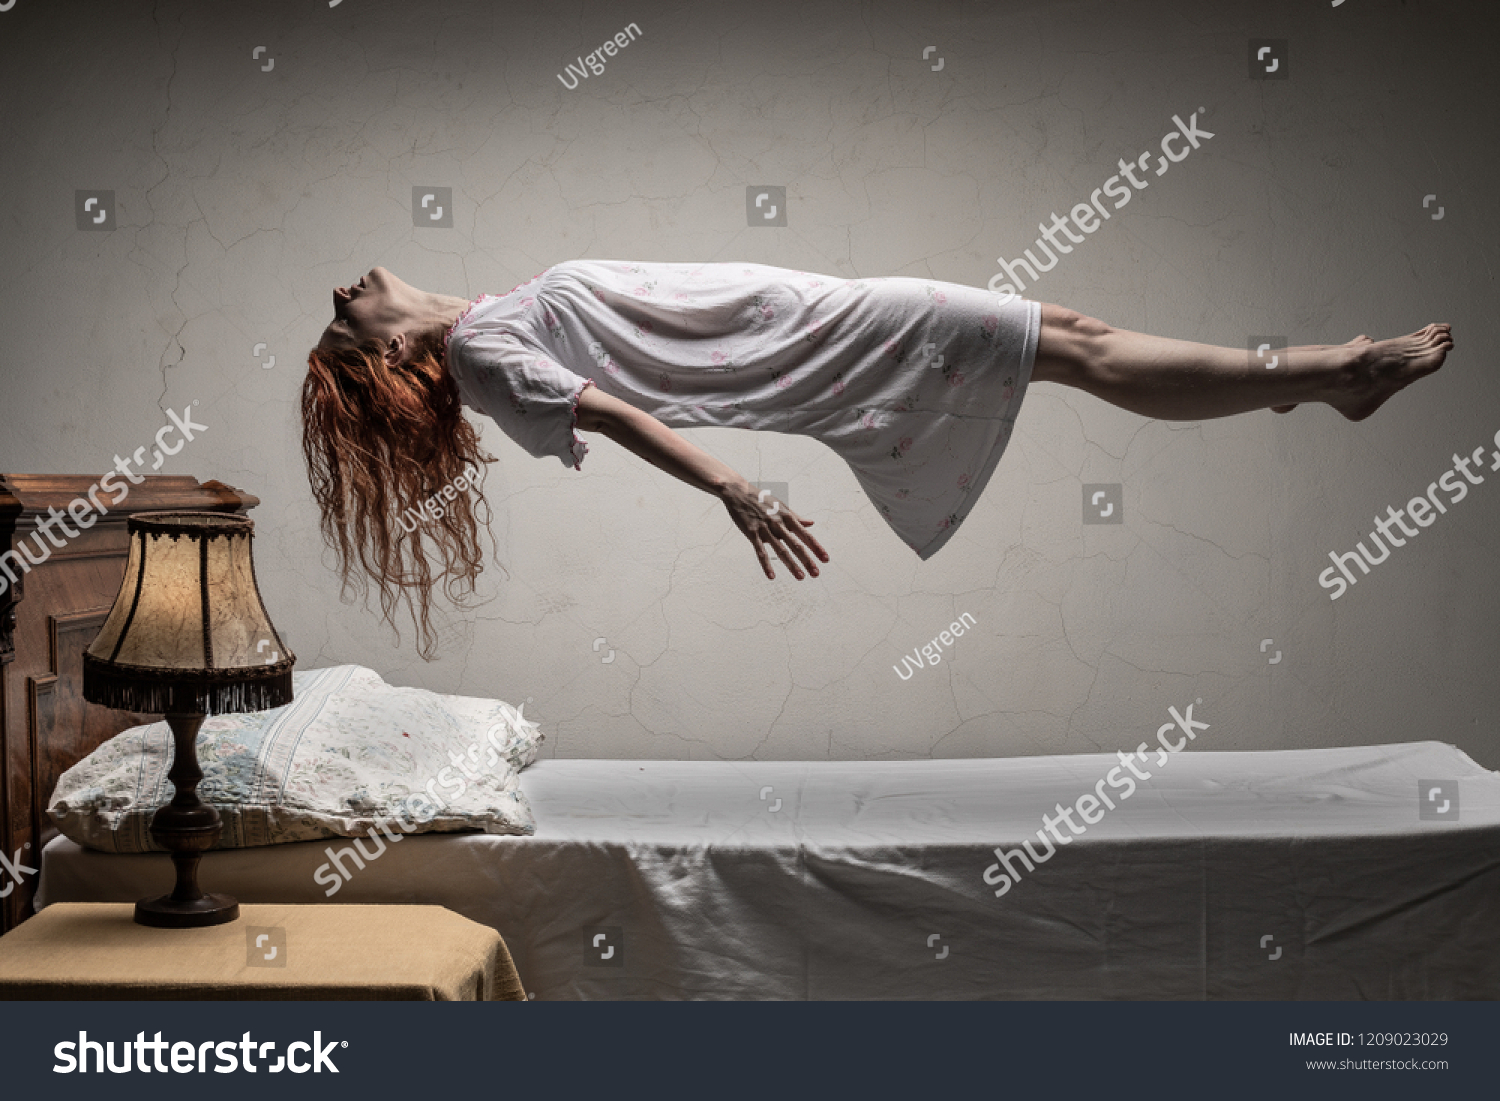 Woman levitating over bed / astral traveling, nightmare, excorcist halloween concept #1209023029